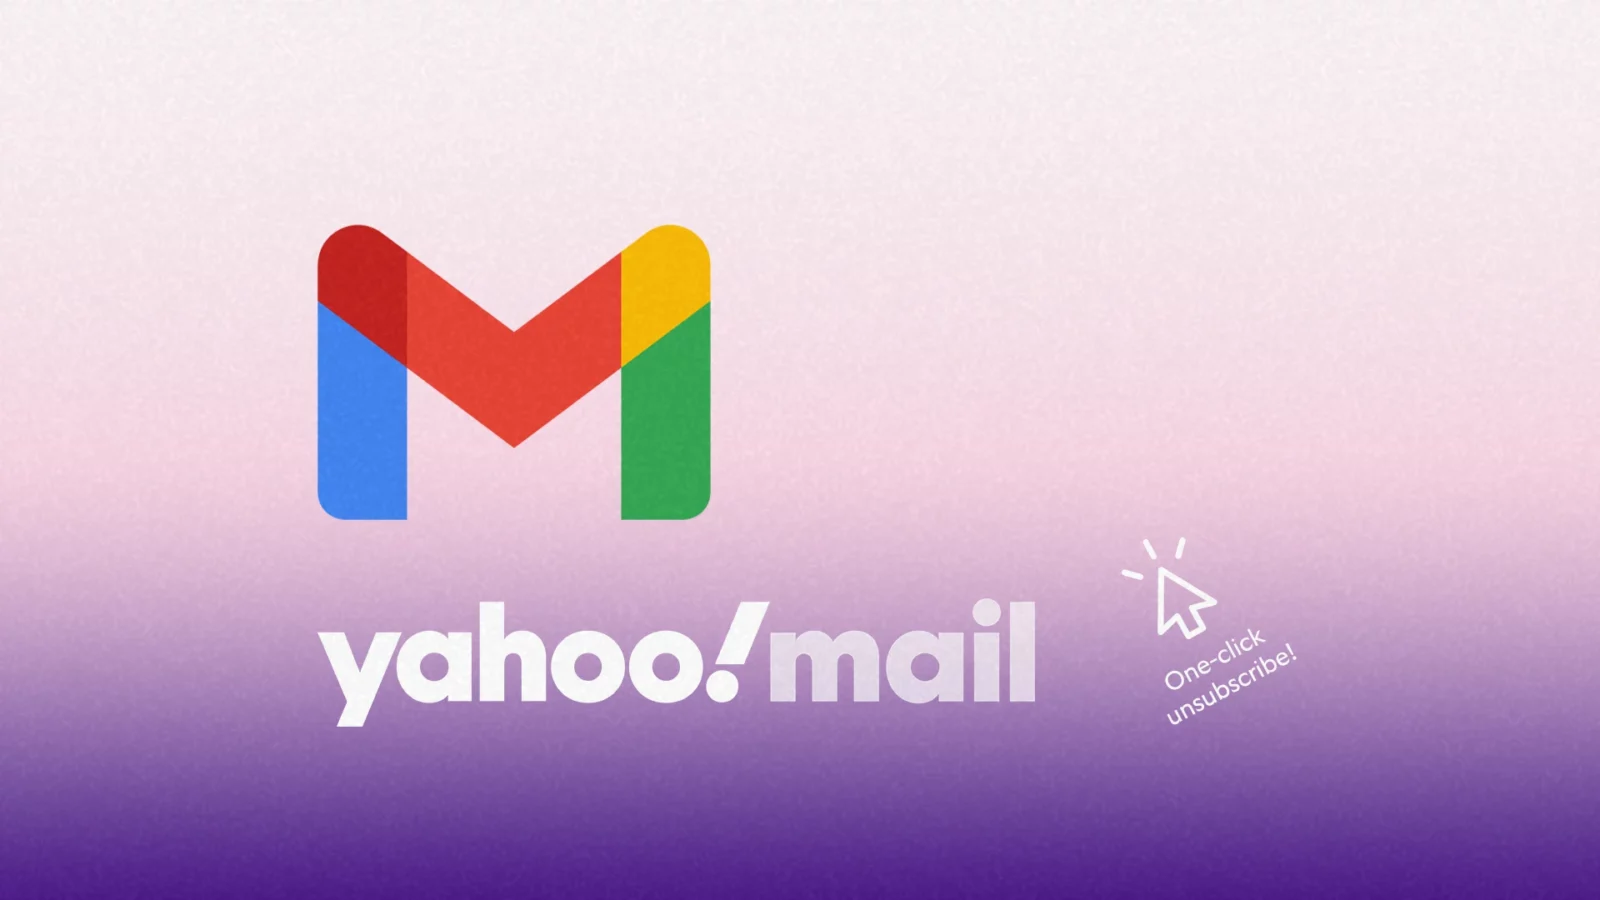 Banner showing Yahoo mail and Gmail logos